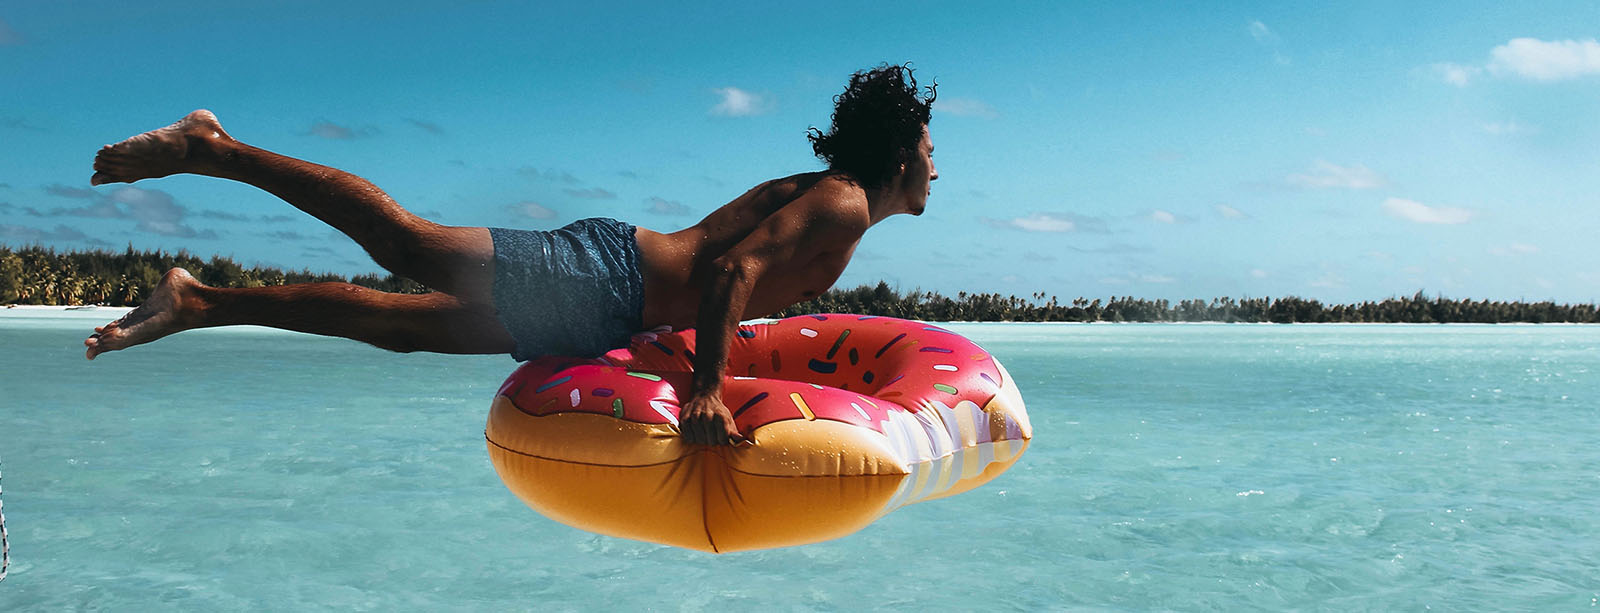 Guy jumping into the ocean with a donut inner tube.